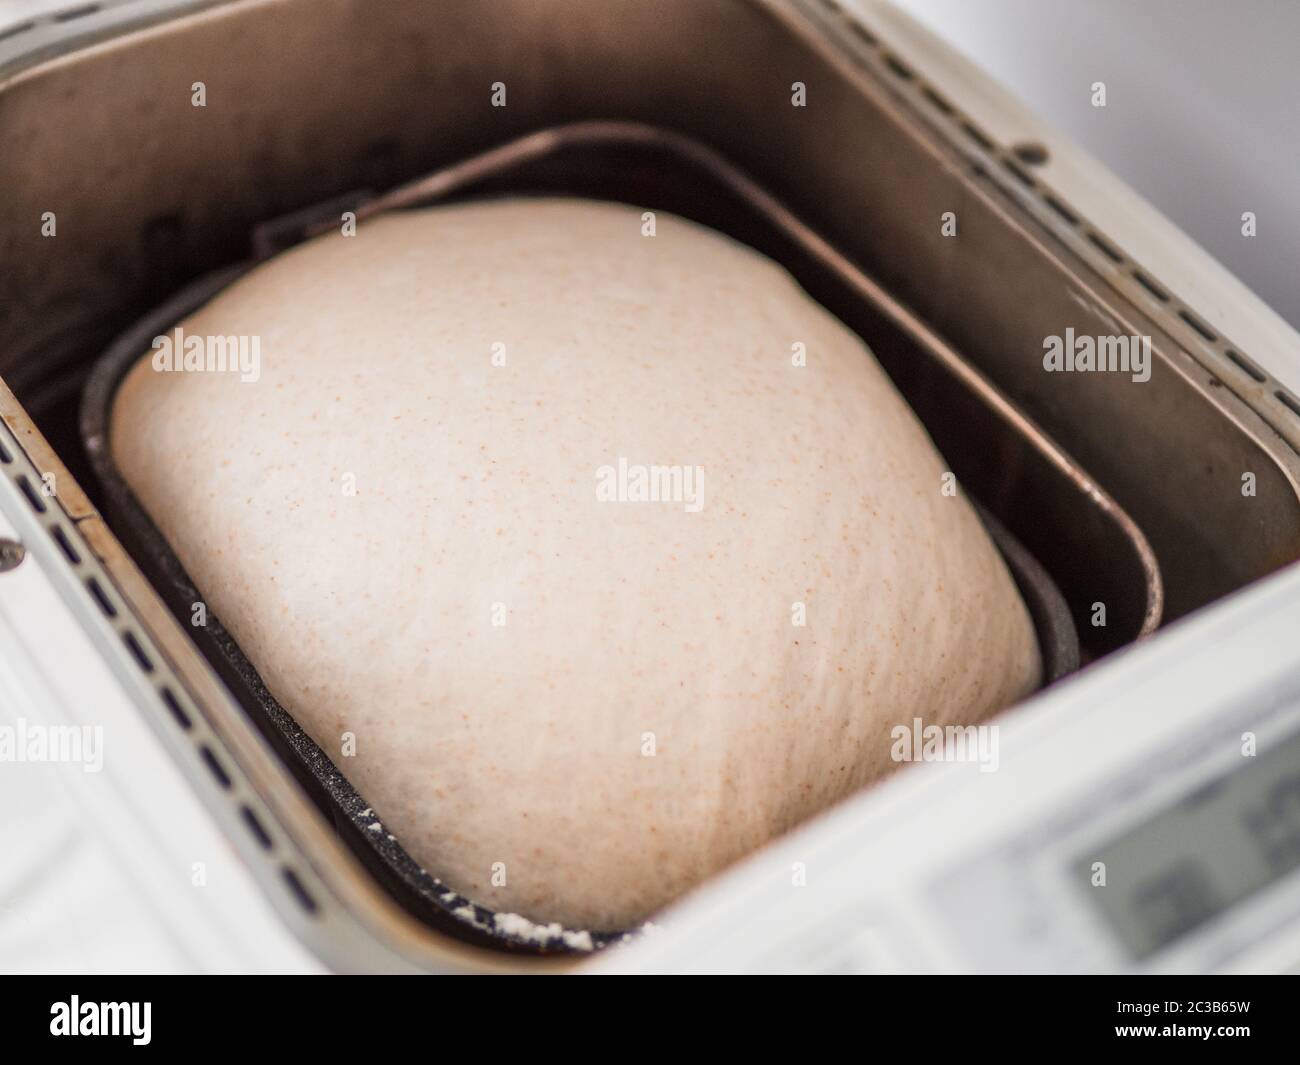 Dough in bread pan of autimatic breadmaker for home use. Perfect raised dough ready for baking in smart bread maker machine with digital display Stock Photo